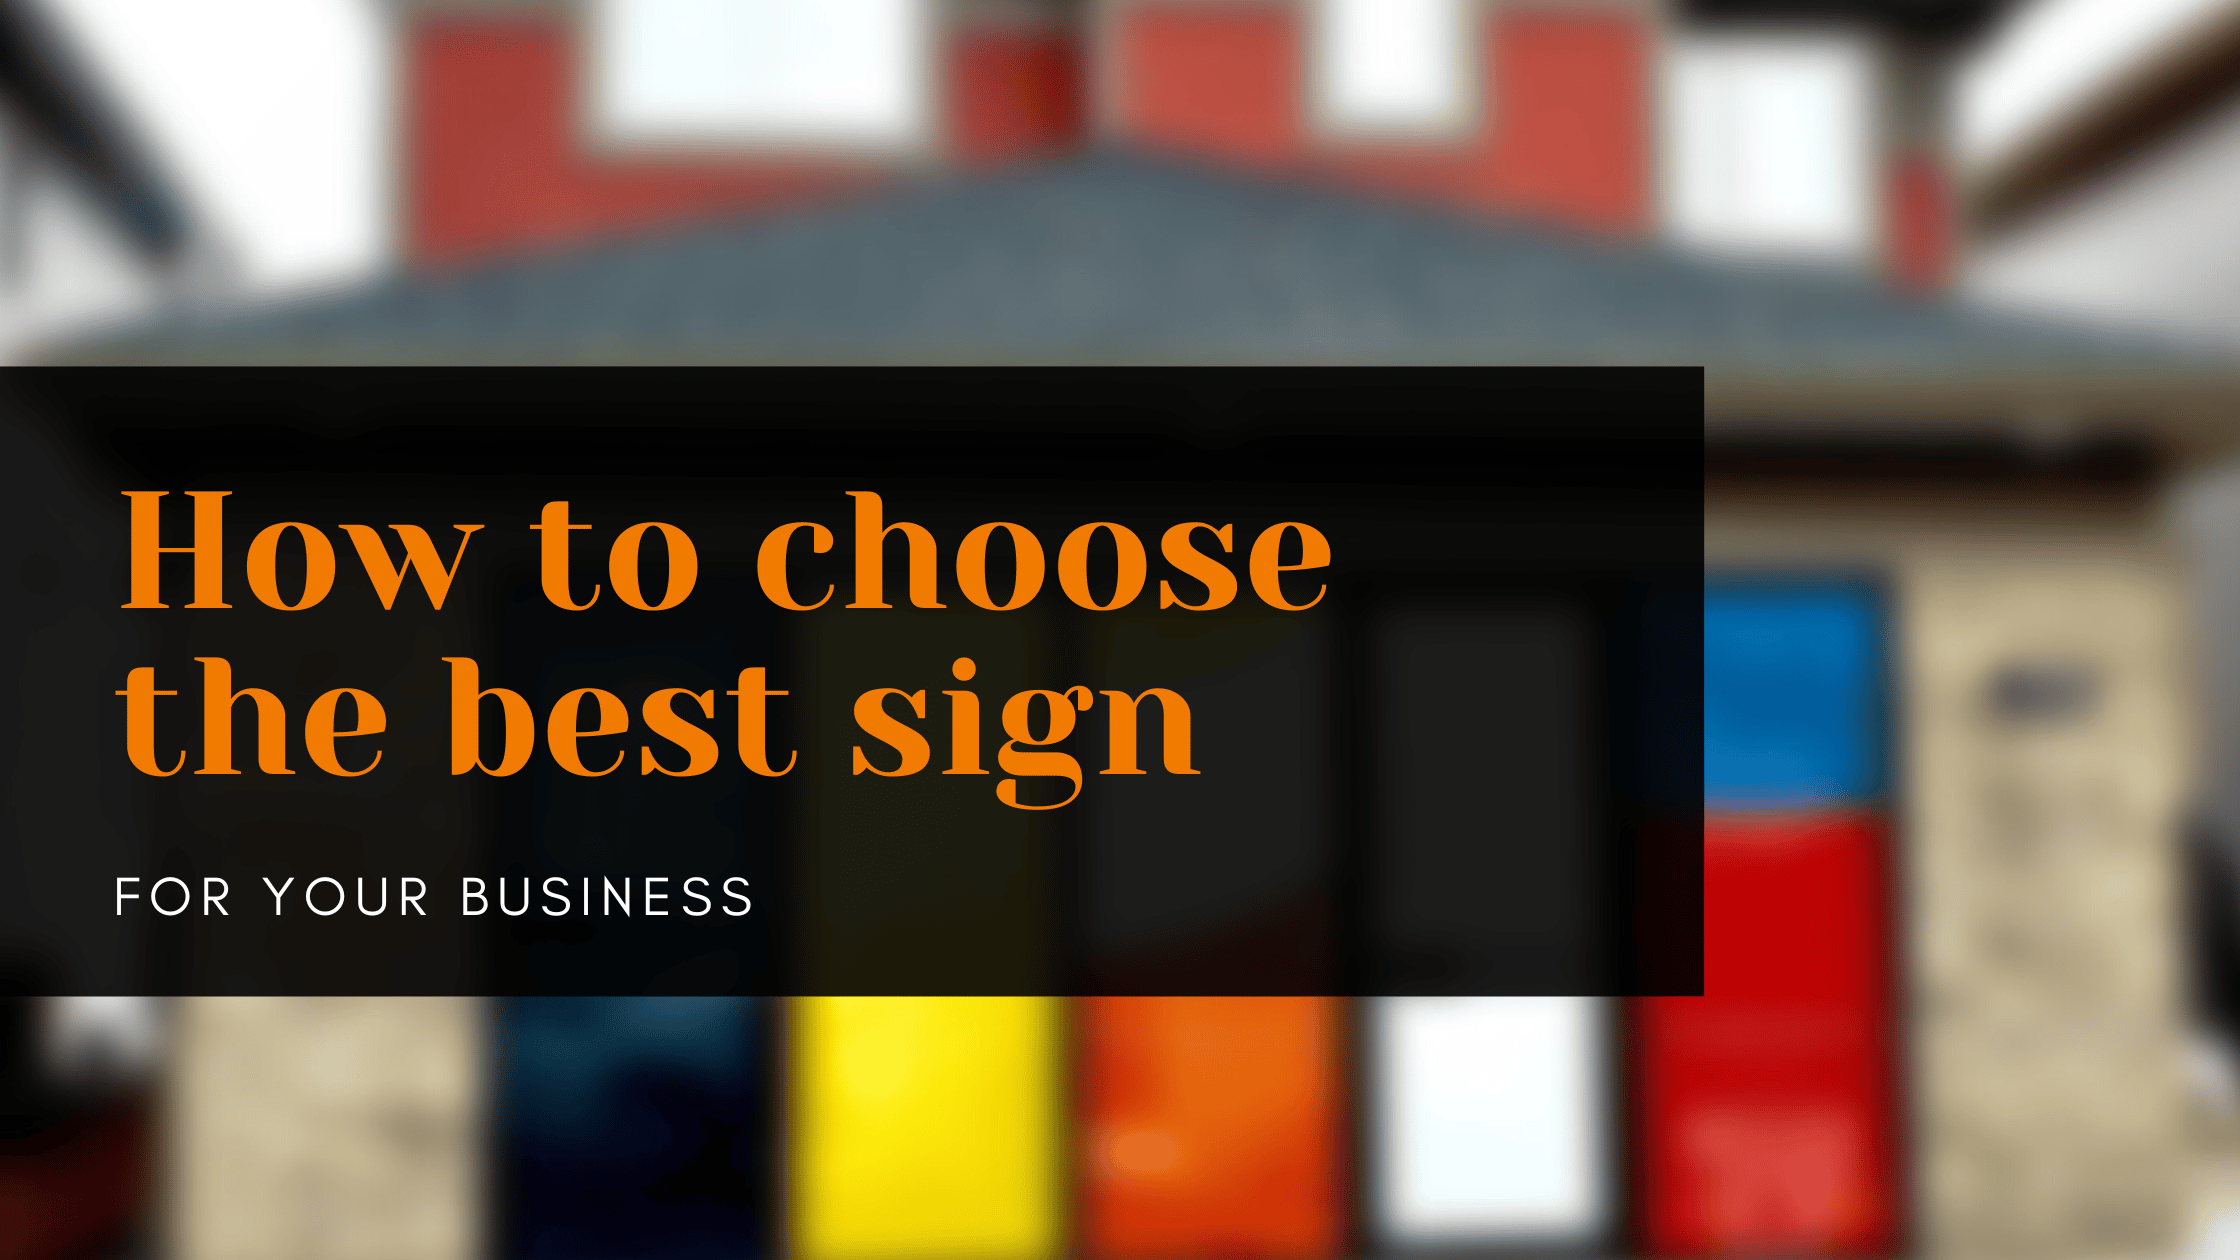 How to choose the best sign for your business blog post banner